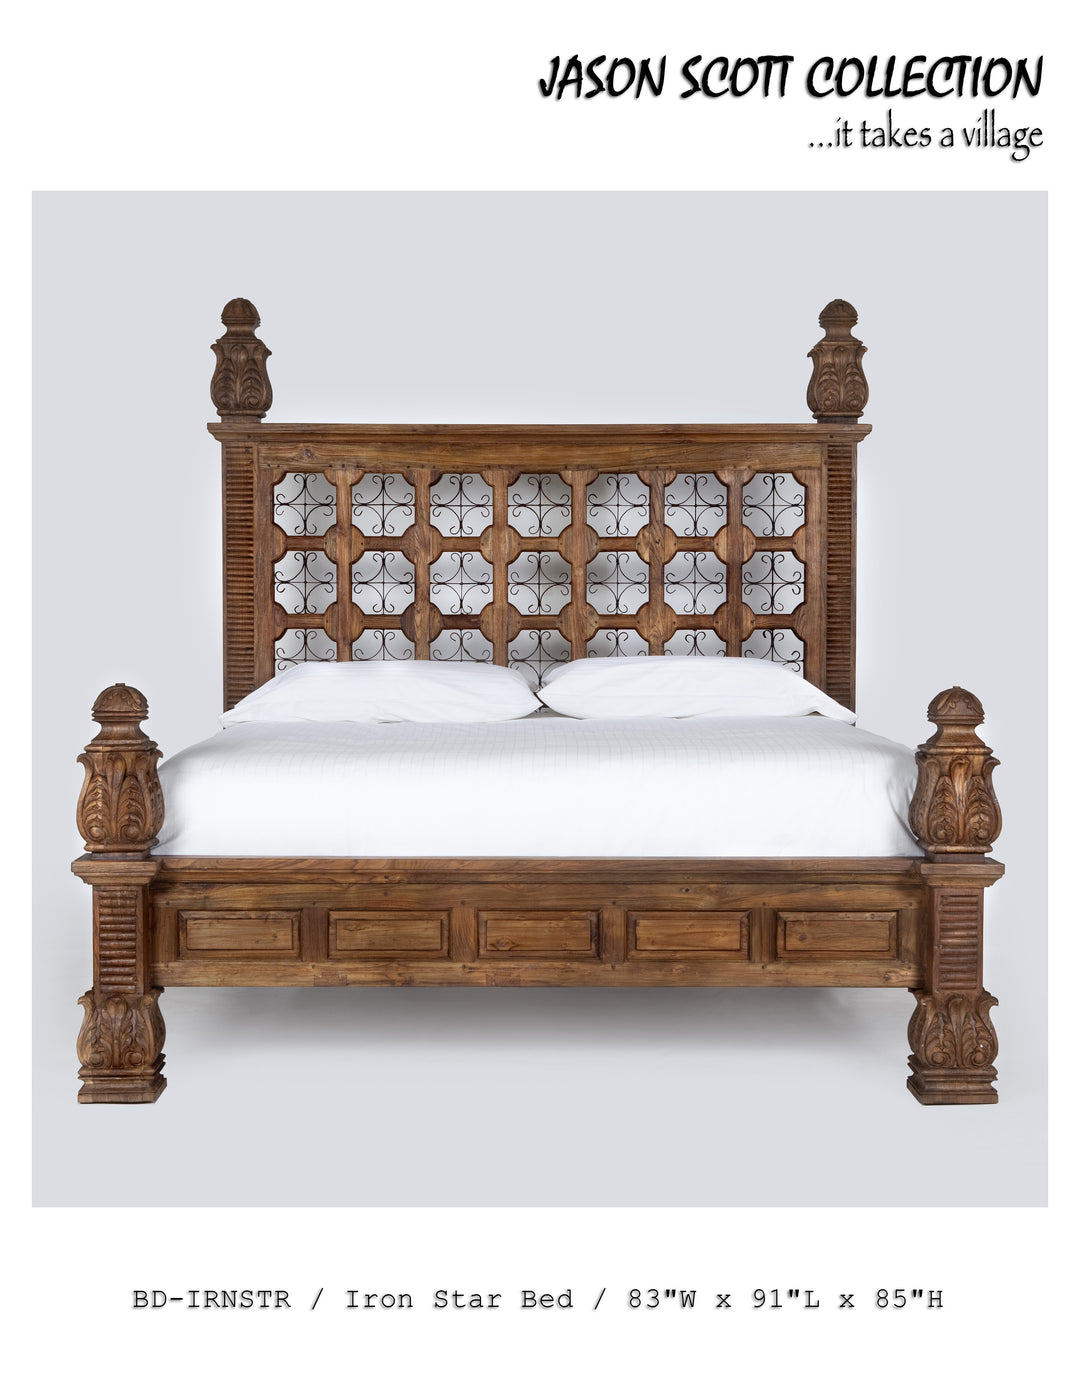 Iron Star Bed with Carving